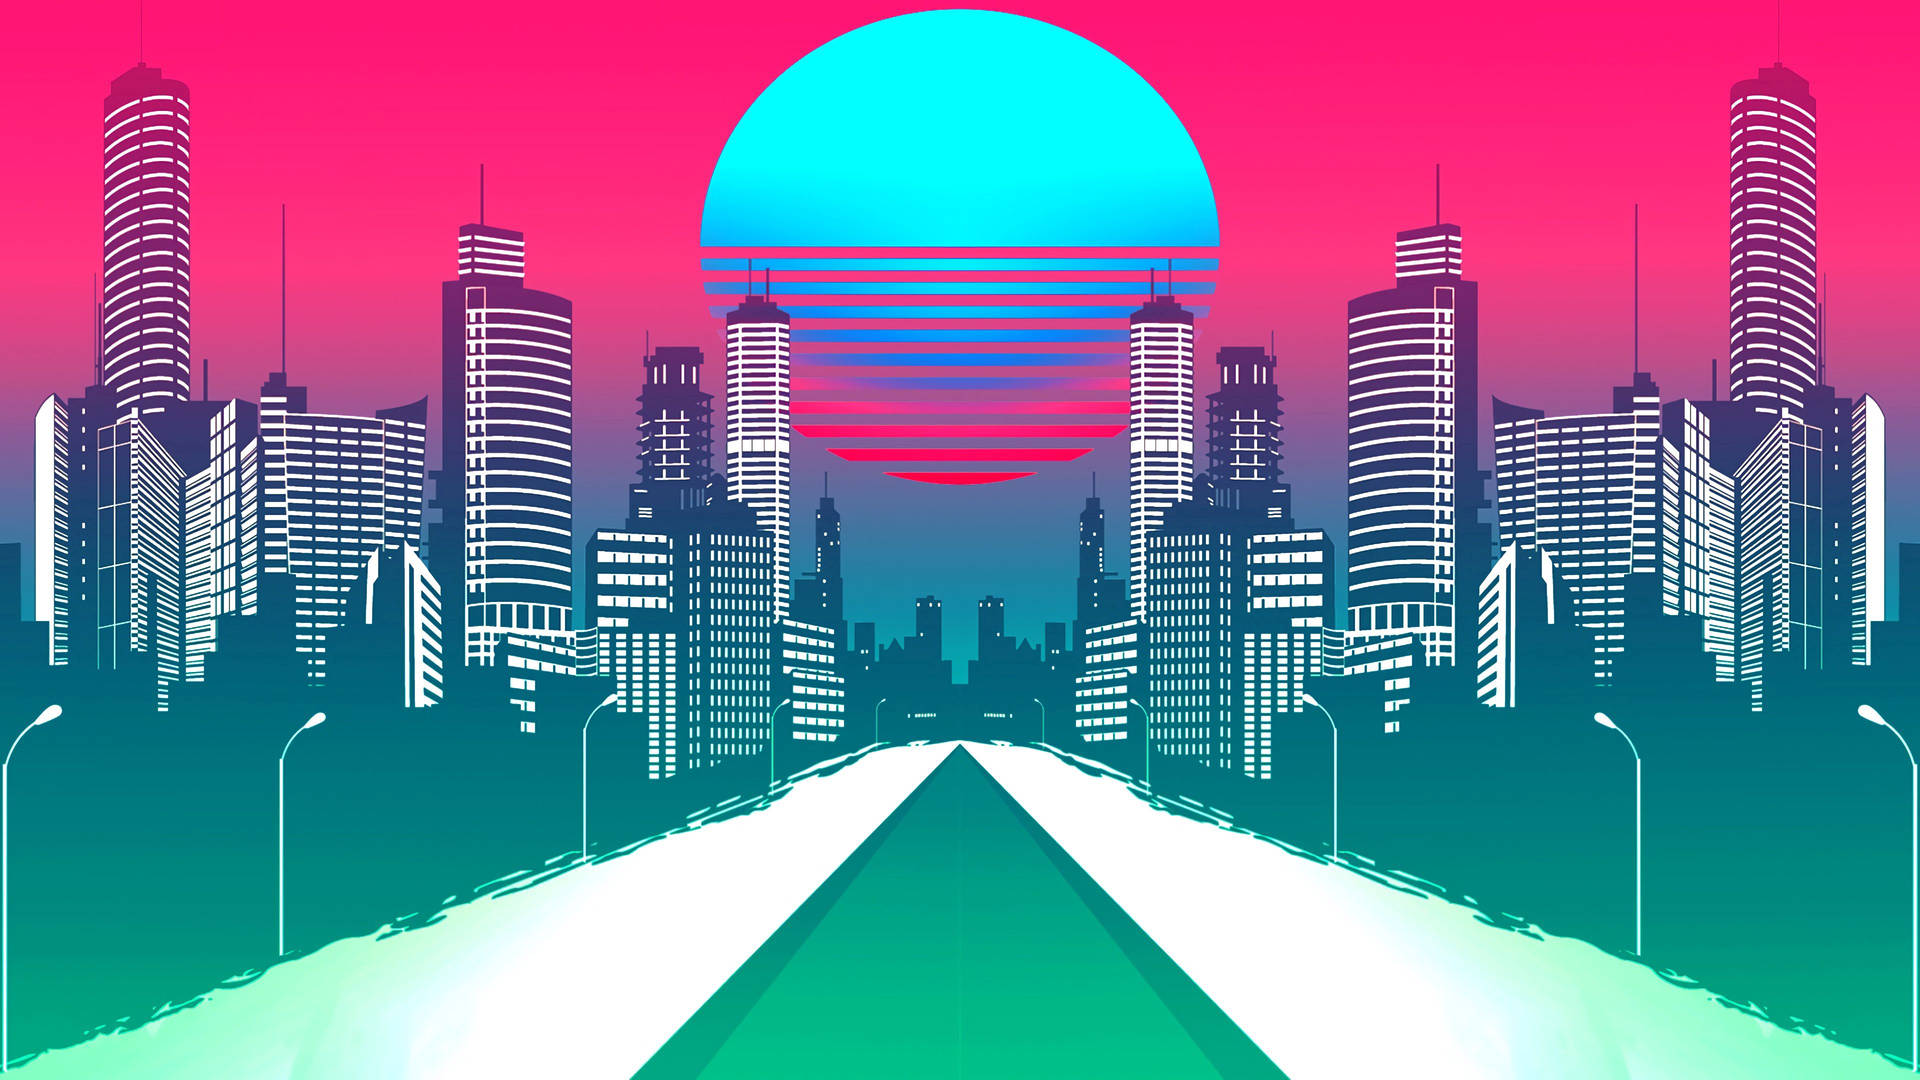 Top 999+ Retrowave Wallpaper Full HD, 4K✅Free to Use